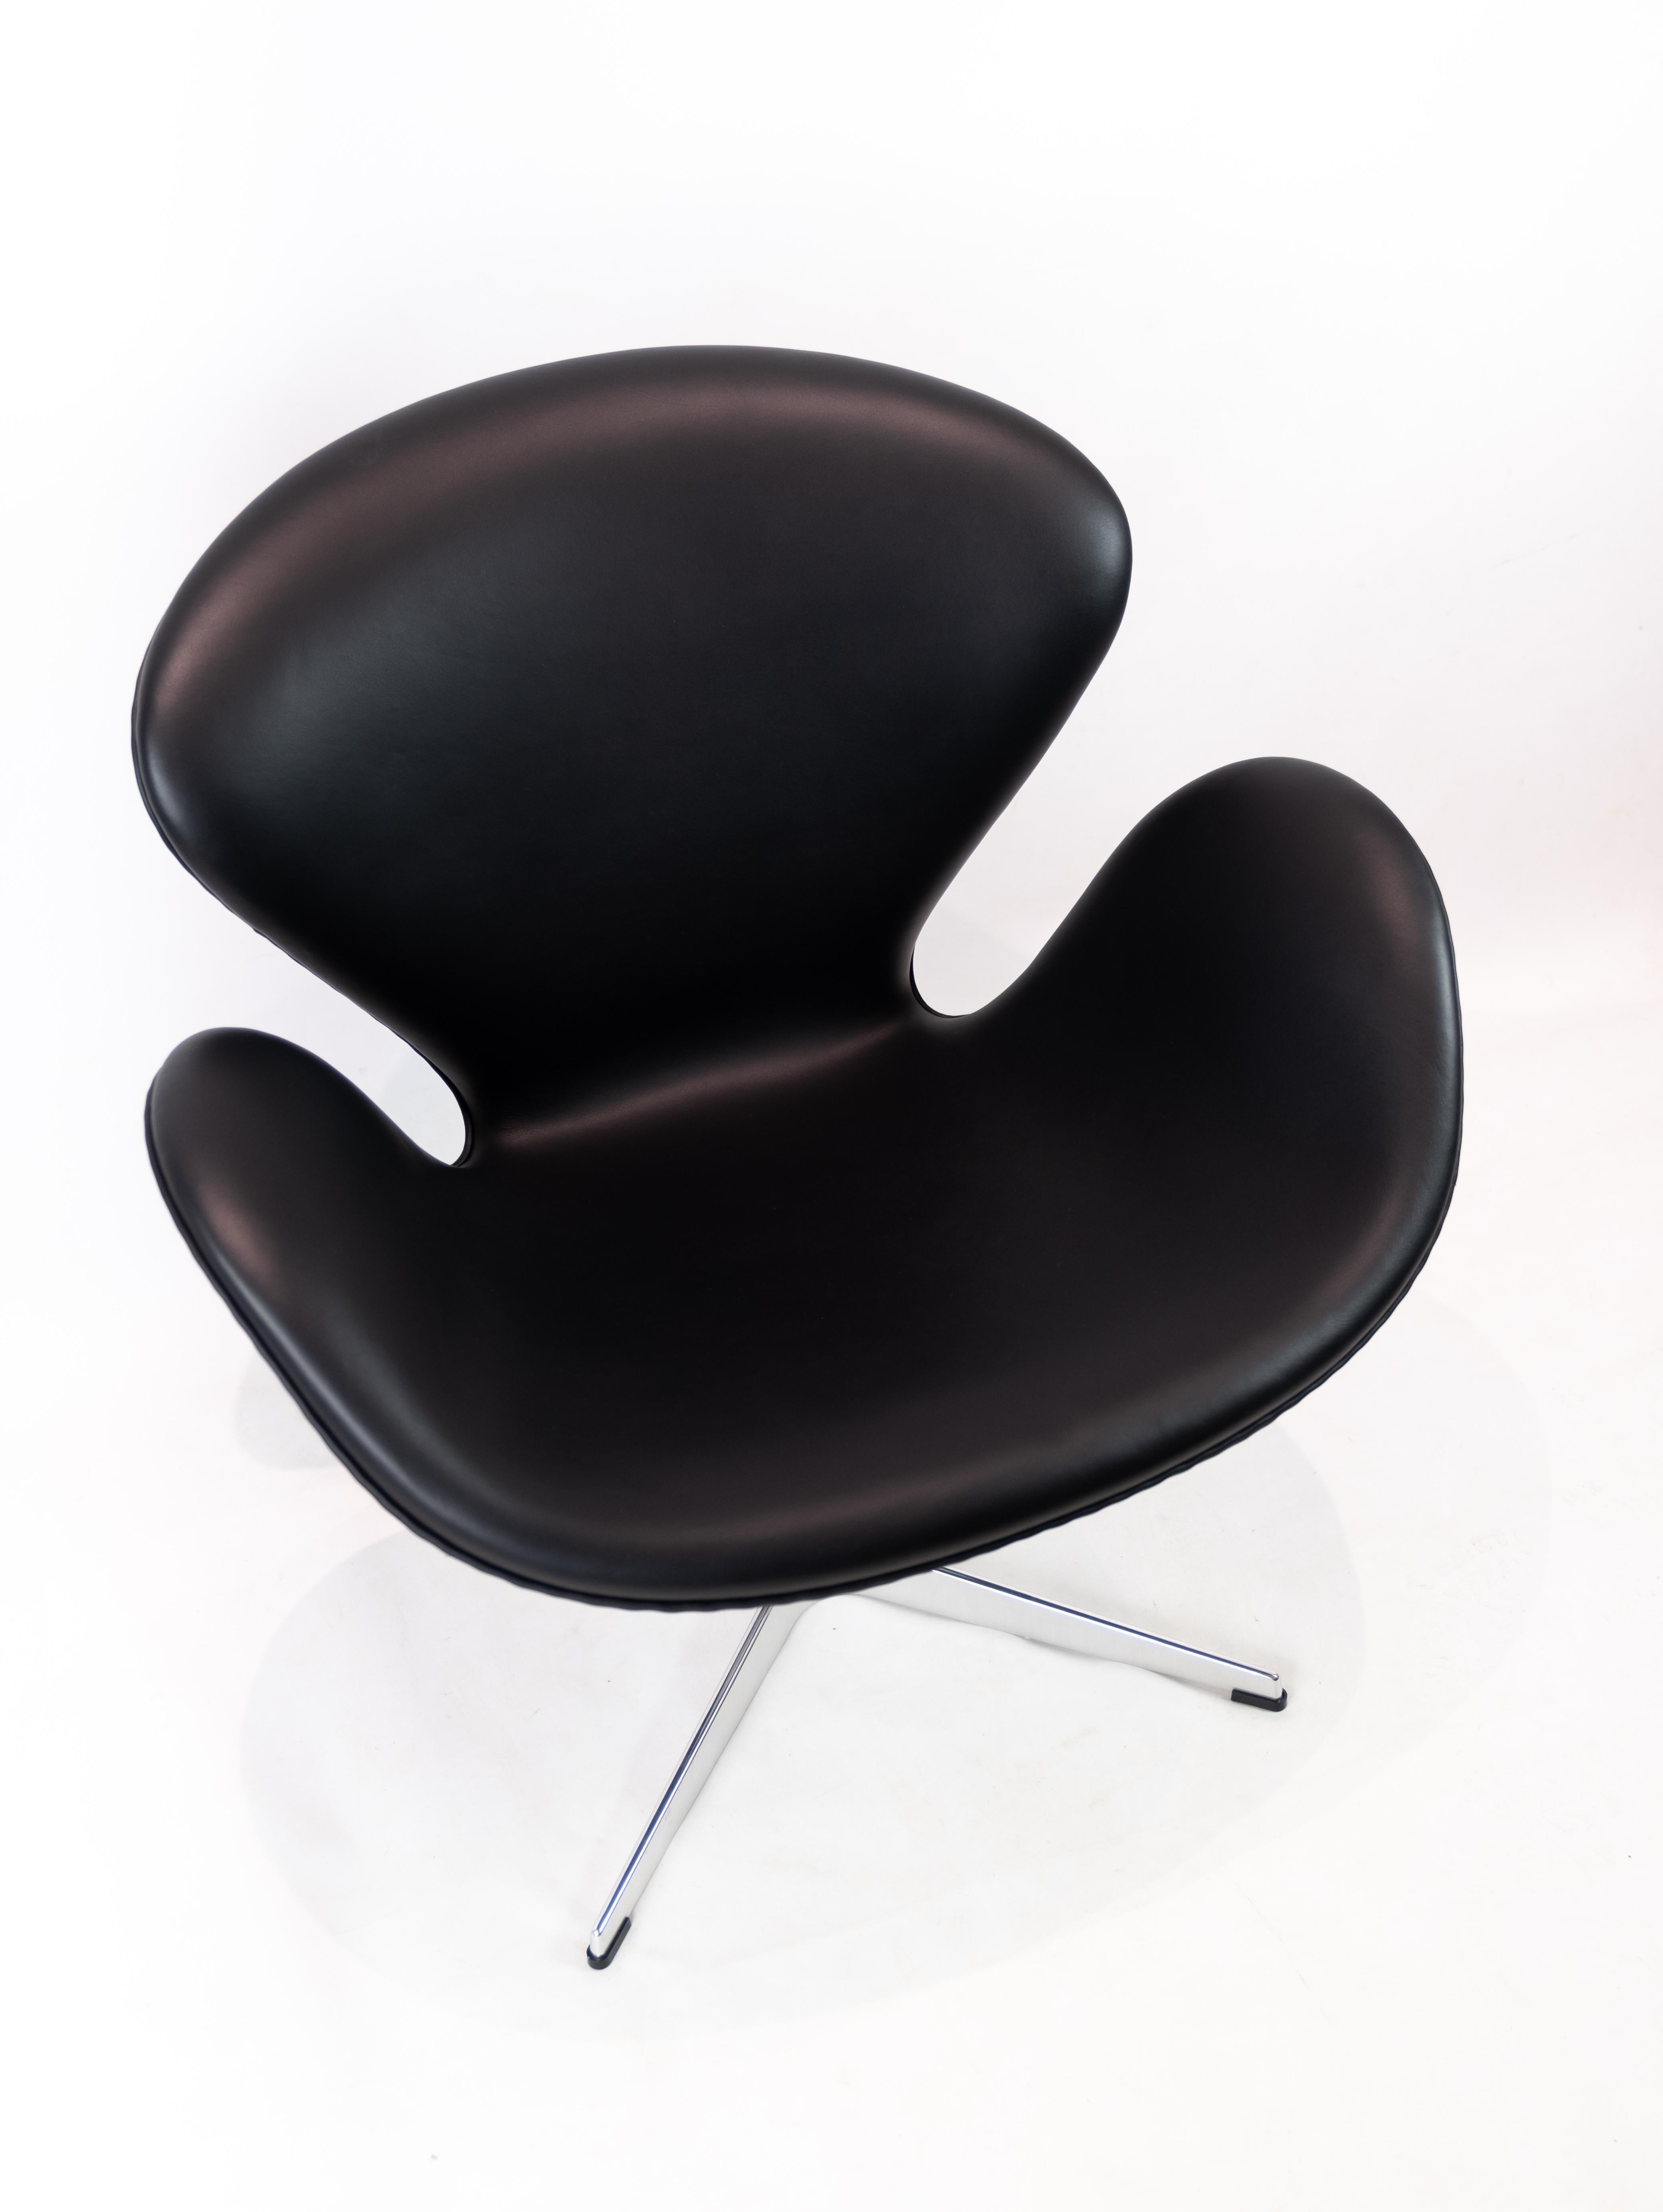 Mid-20th Century Scandinavian Modern Pair of Swan Chairs, Model 3320, Designed by Arne Jacobsen For Sale